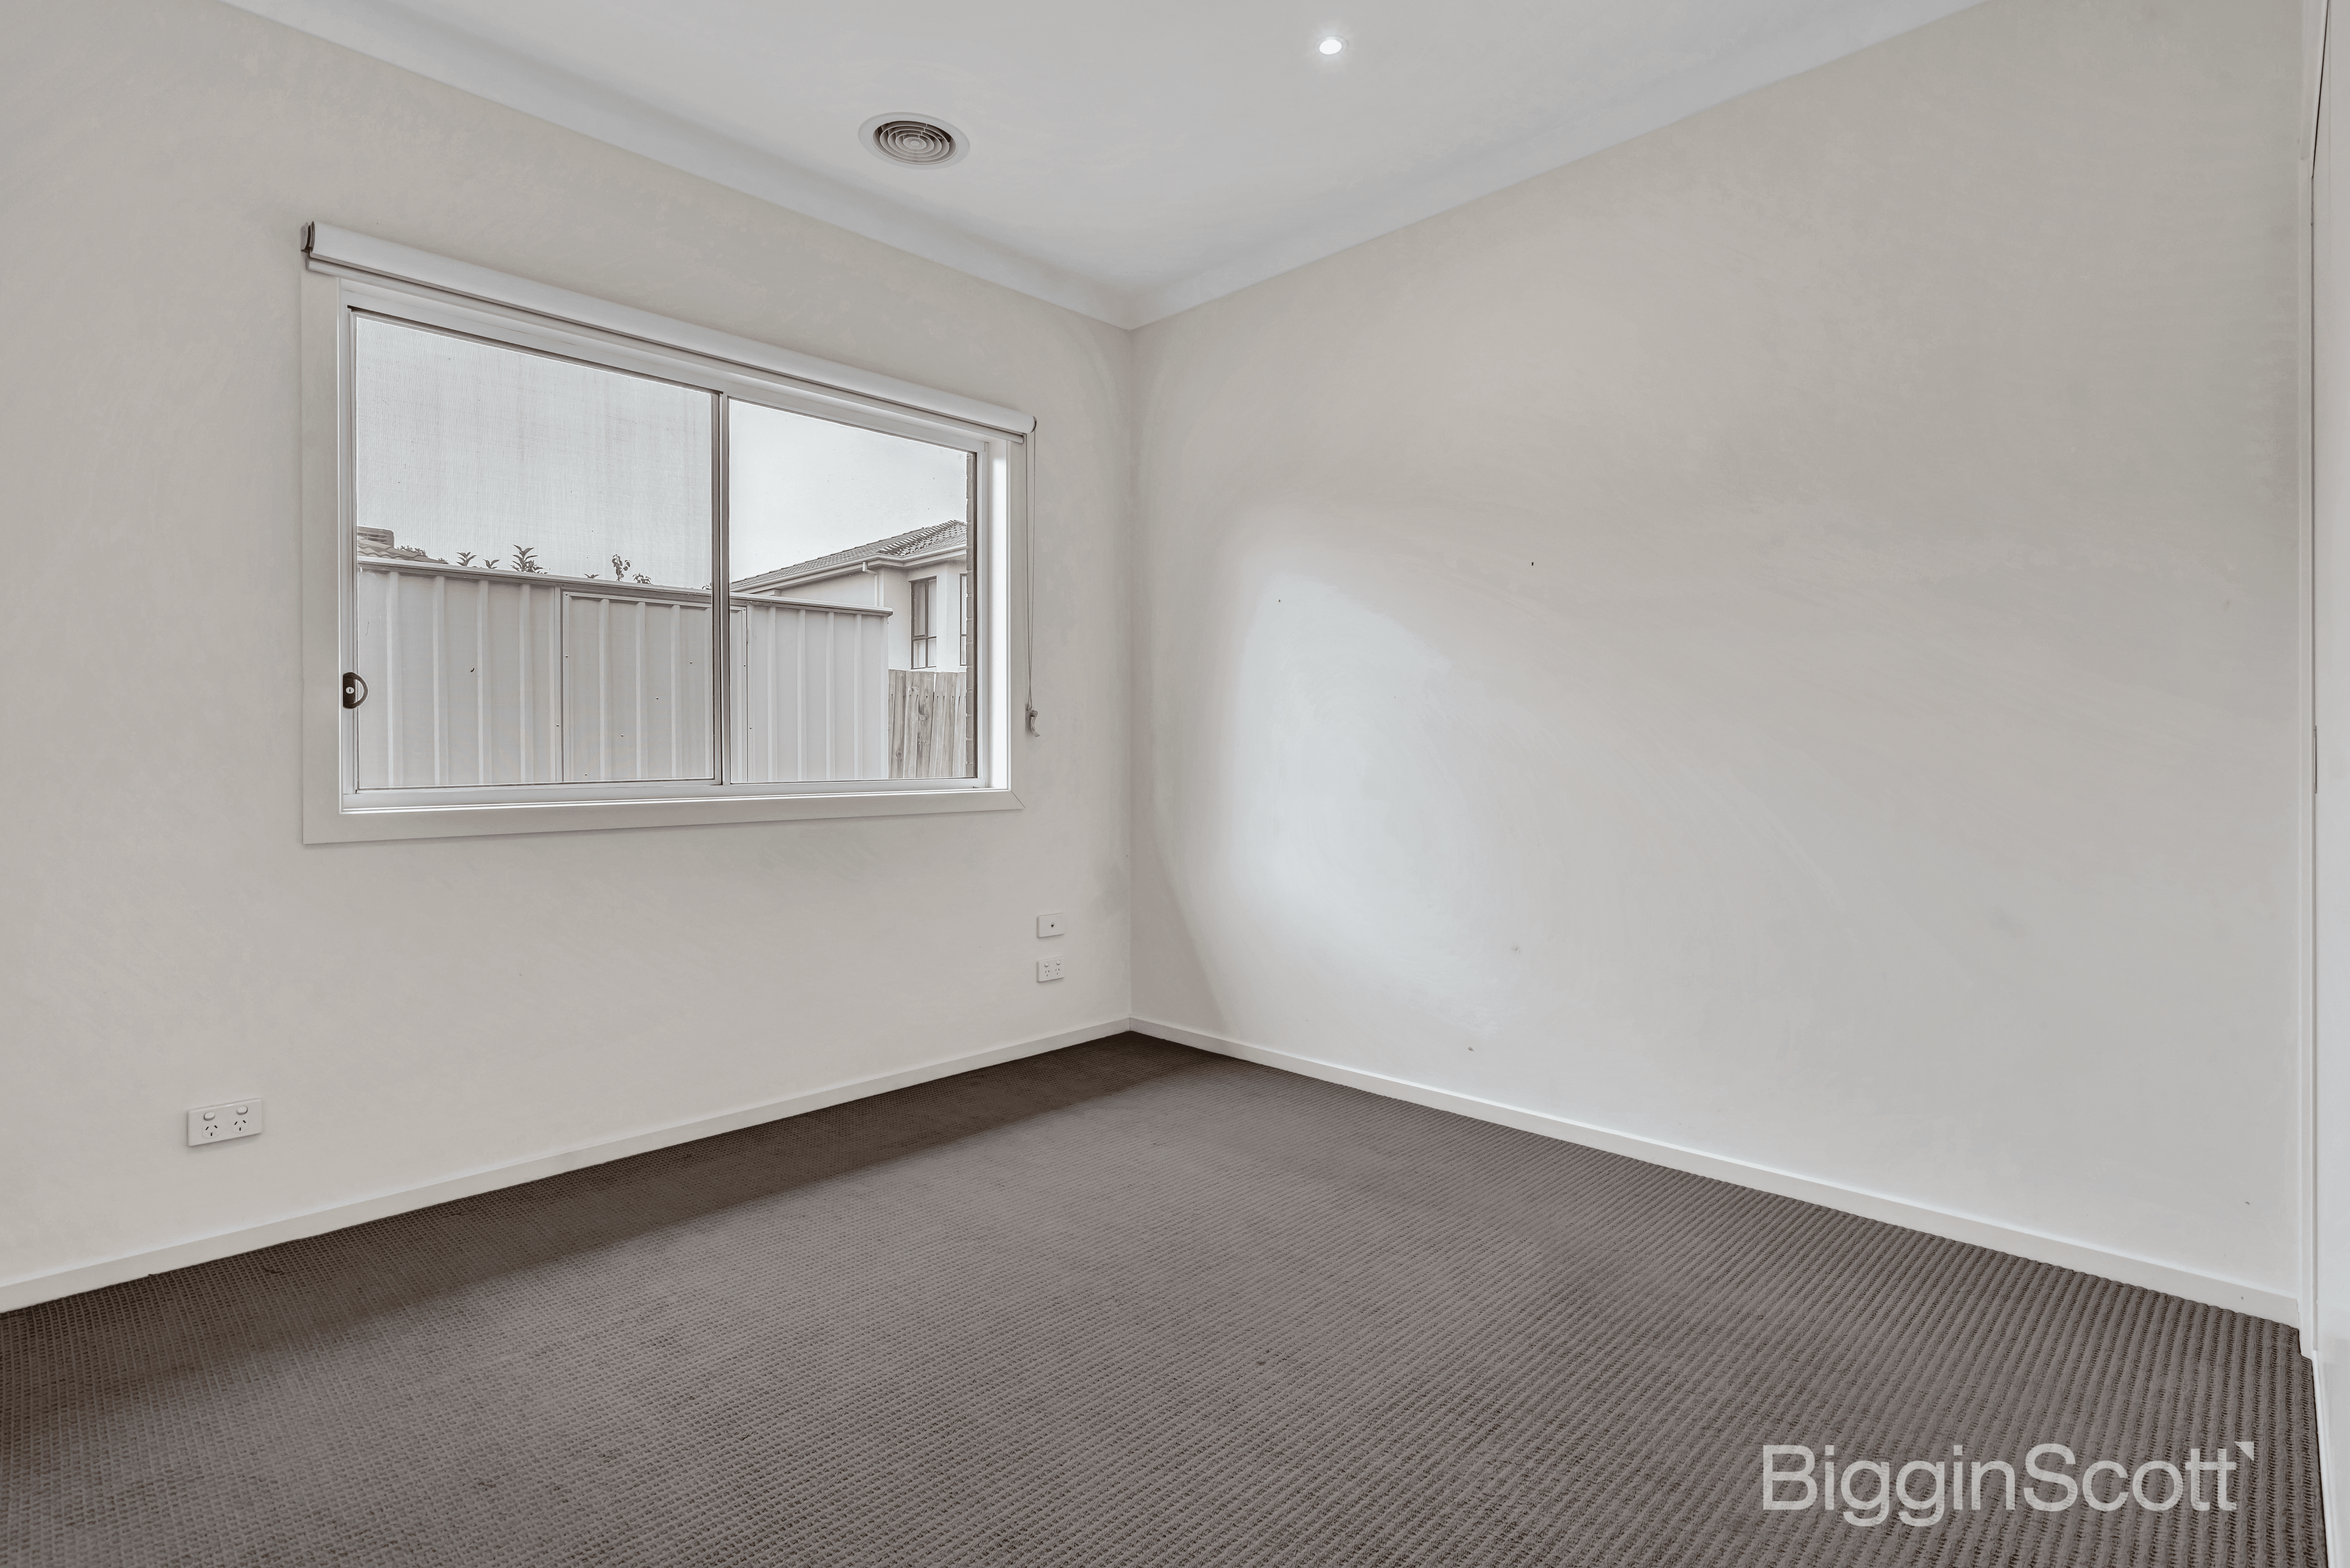 3/24 Aviemore Way, POINT COOK, VIC 3030